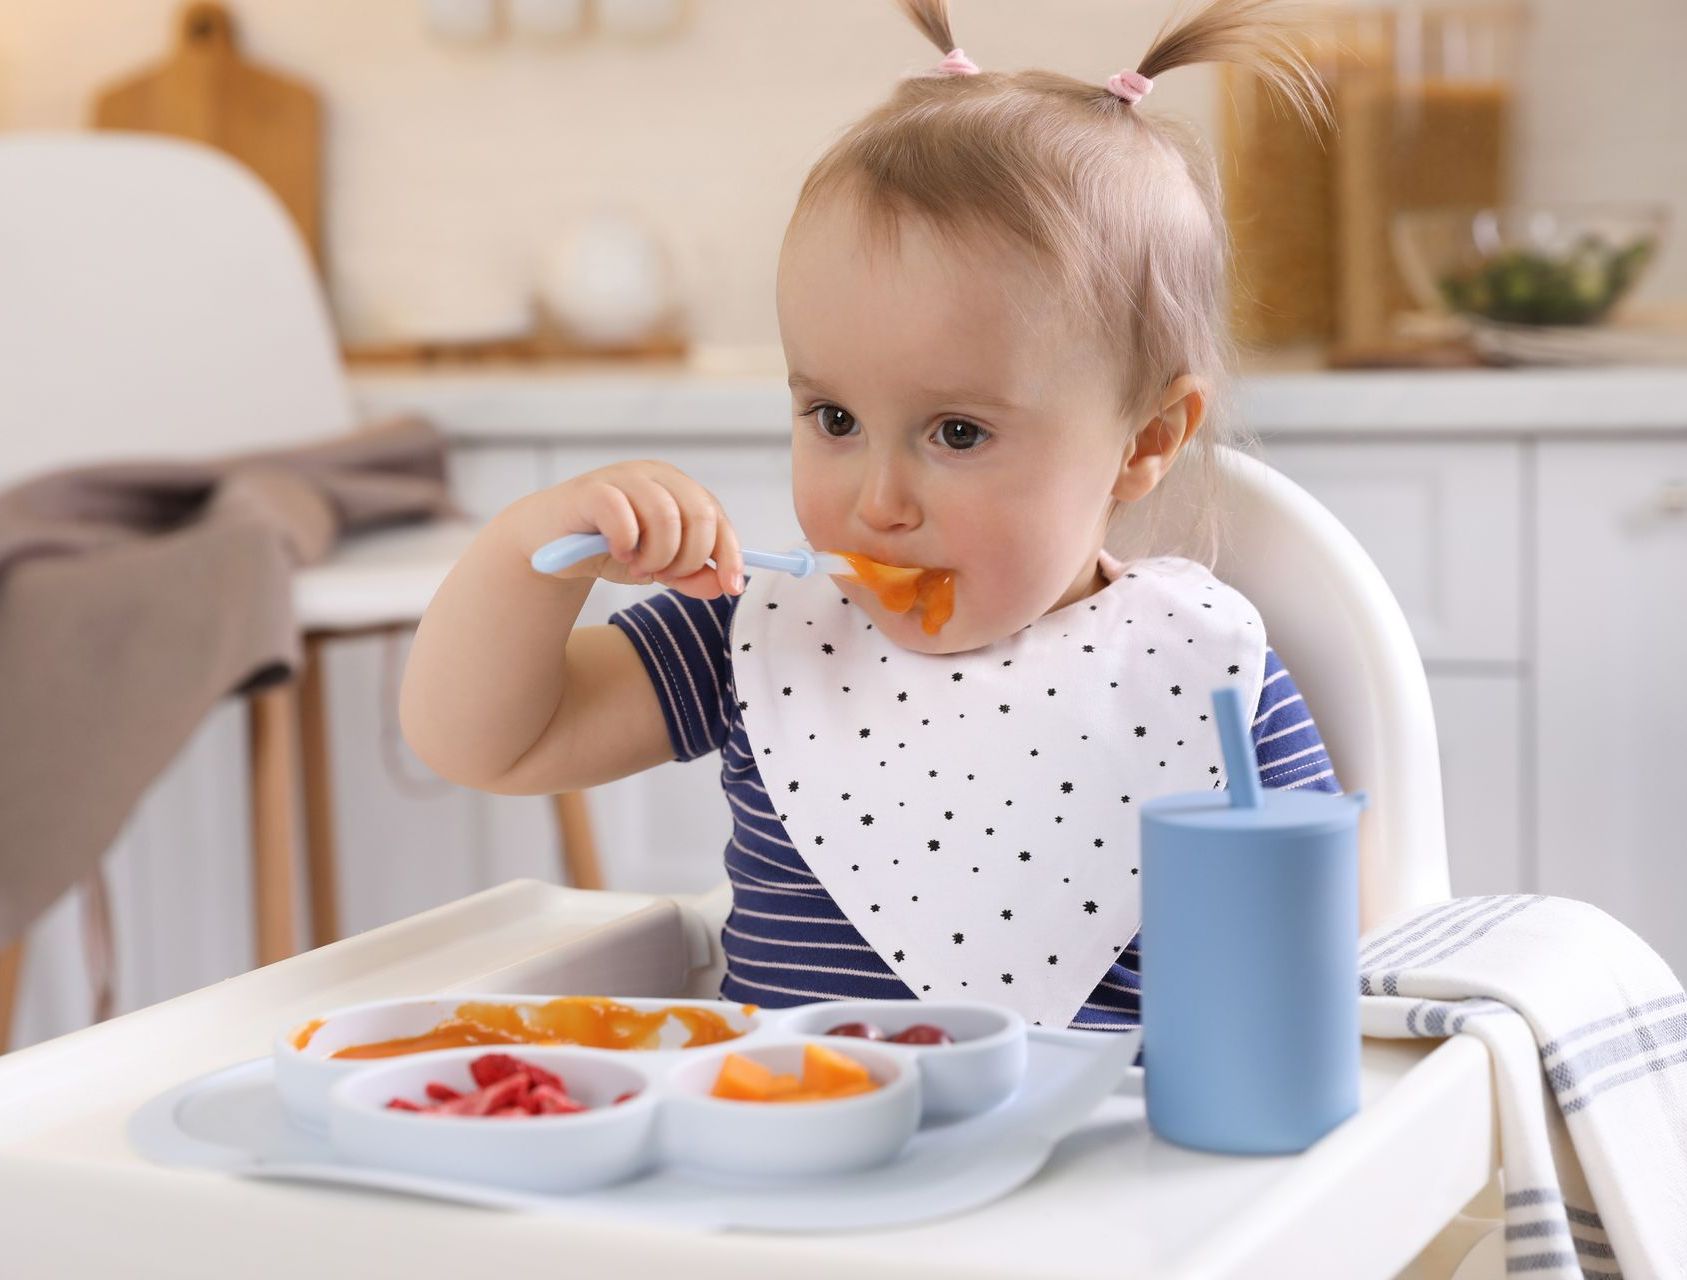 a baby is sitting in a high chair eating food with a spoon